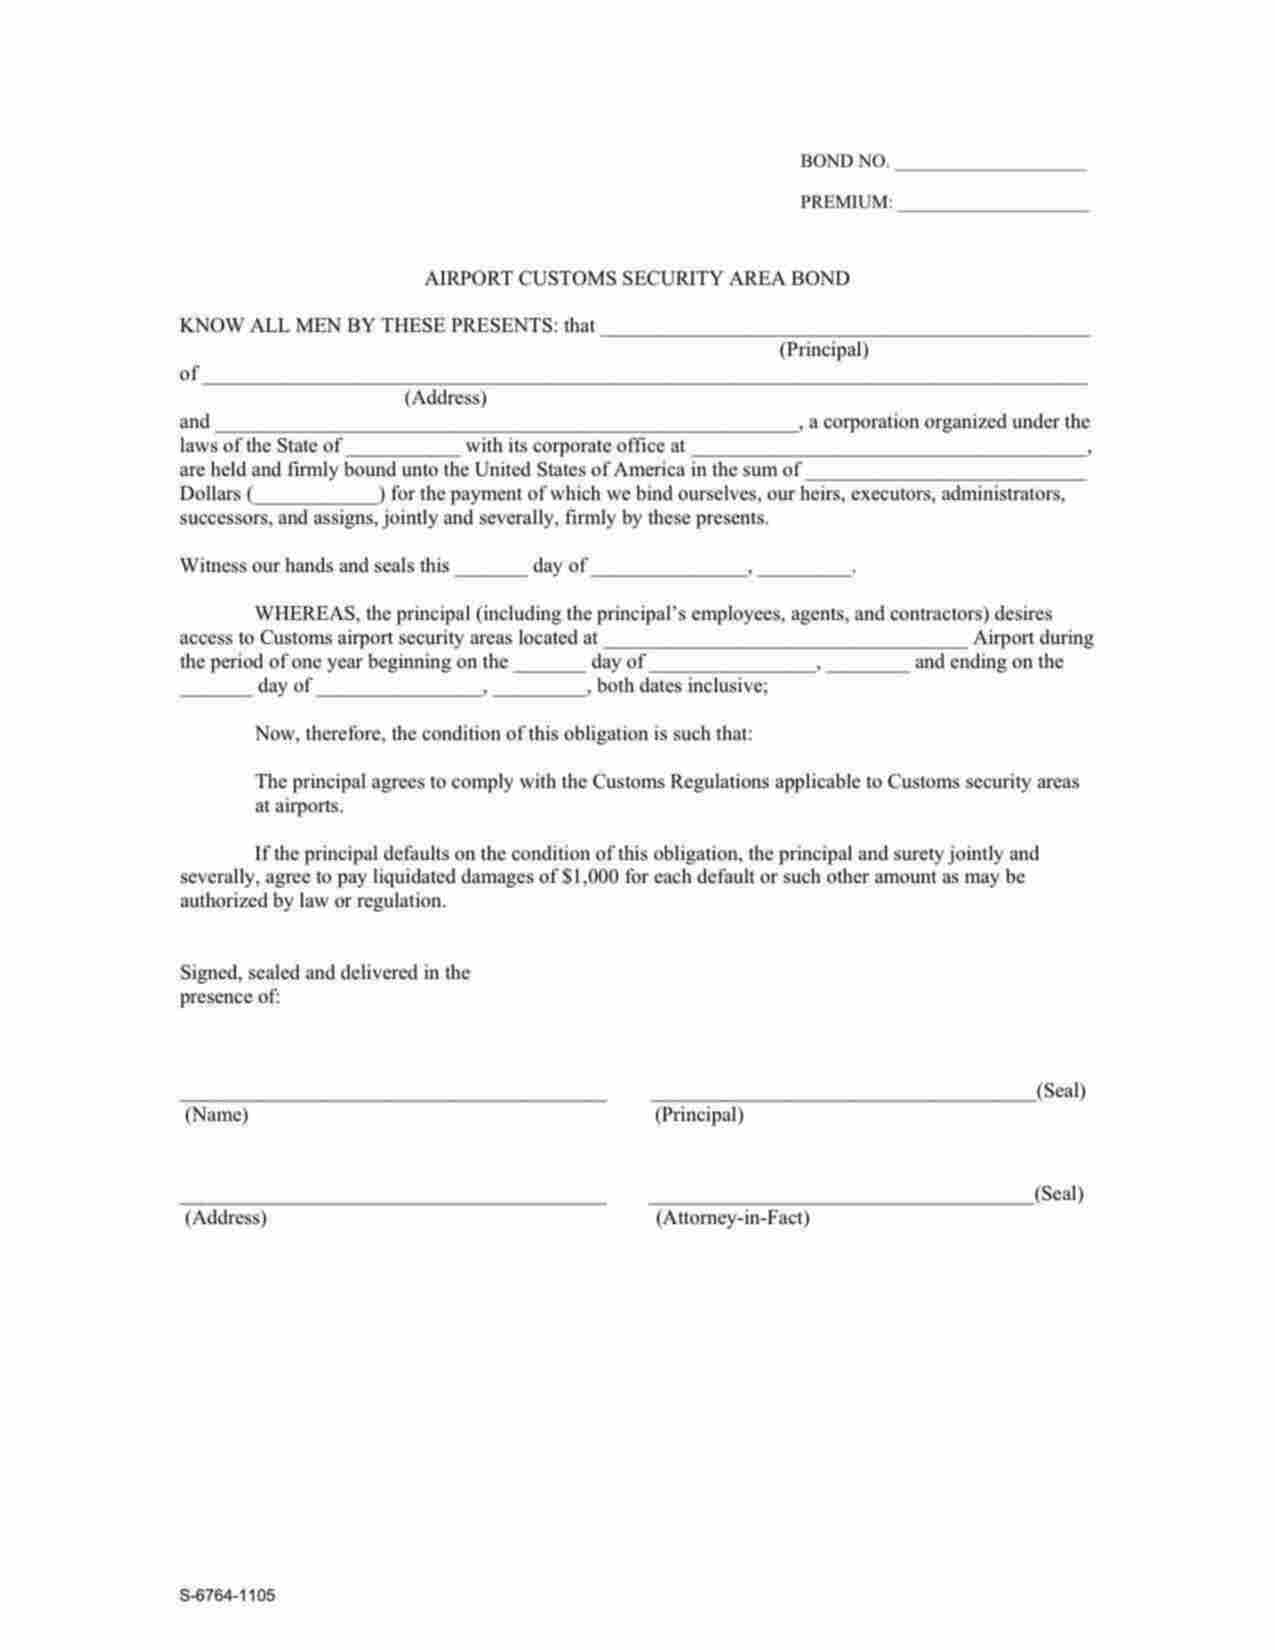 Federal Airport Customs Security Area Bond Form